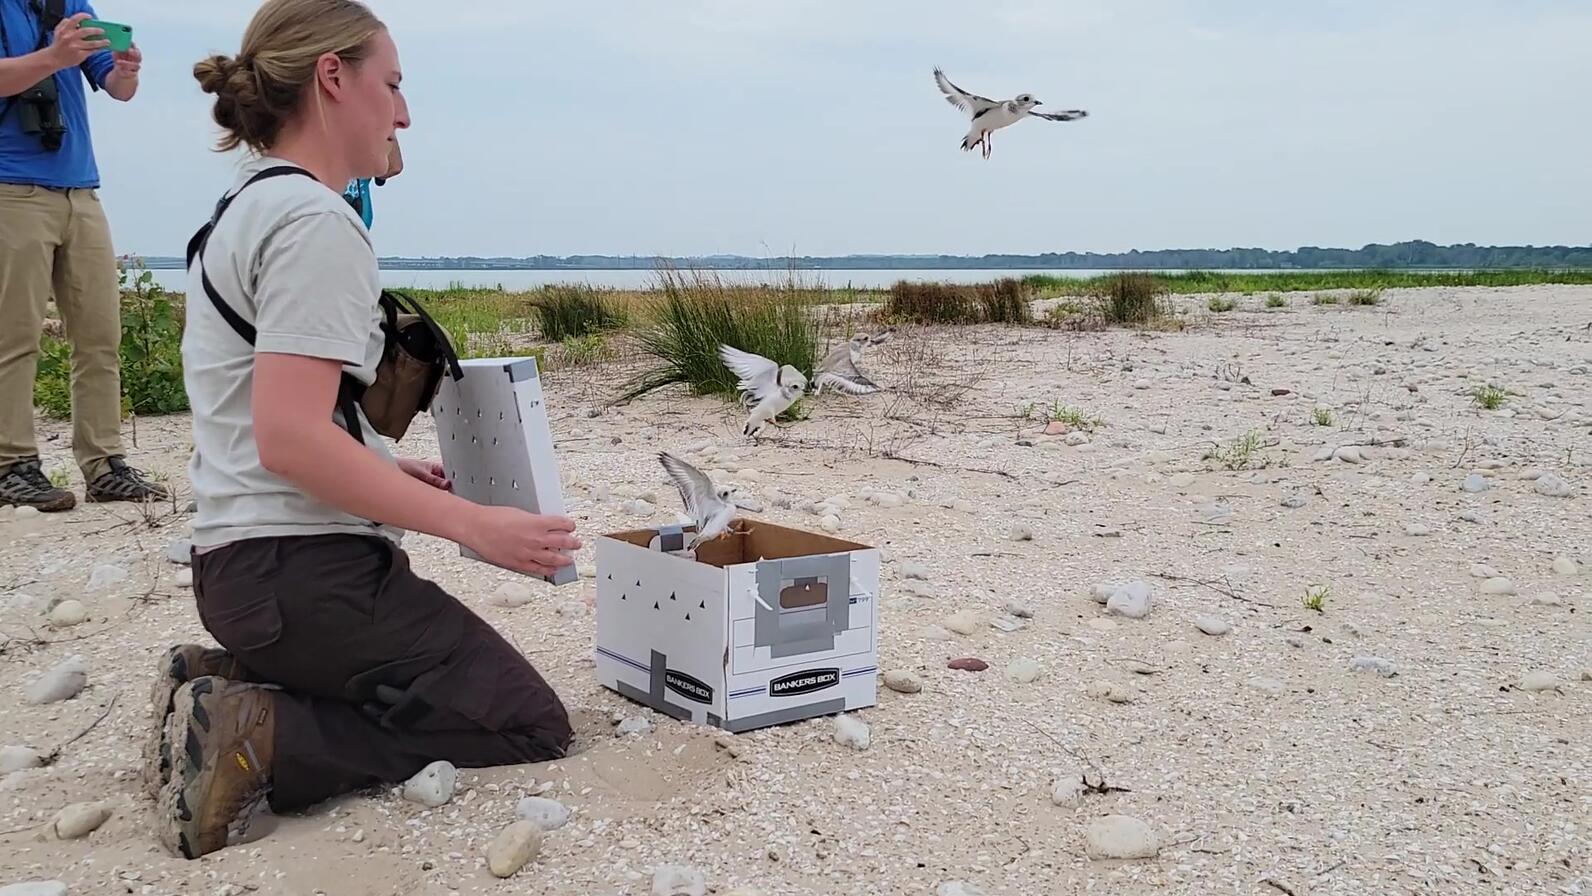 U.S. Fish and Wildlife Service, Audubon Great Lakes and partners at Detroit Zoo and University of Minnesota, released four federally endangered Great Lakes piping plover chicks at the Cat Island Restoration Site, in Lower Green Bay.